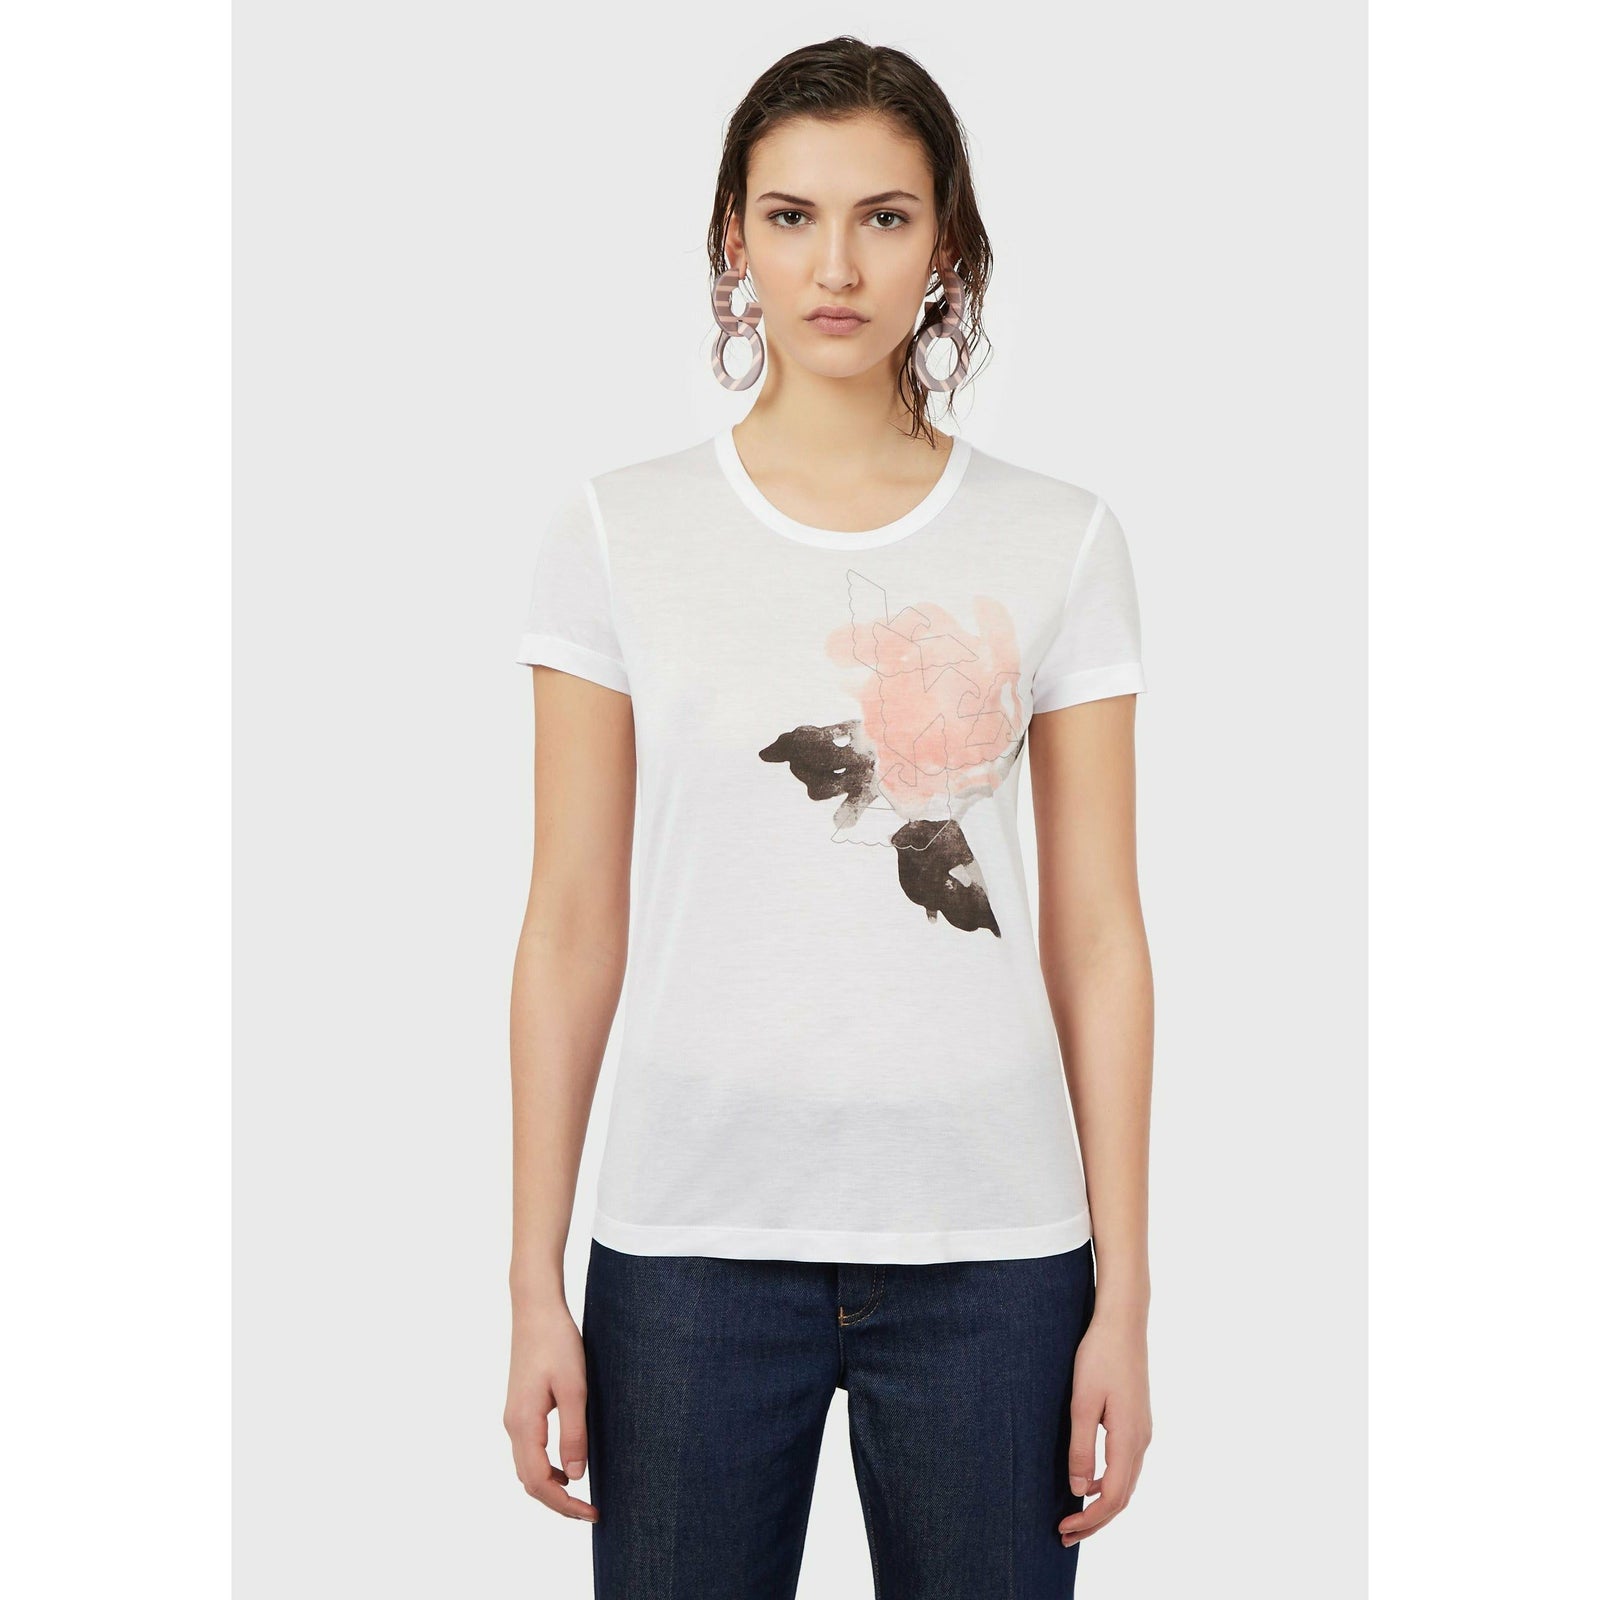 MICRO-MODAL T-SHIRT WITH EAGLE PRINT ON WATERCOLOUR ROSE - Yooto